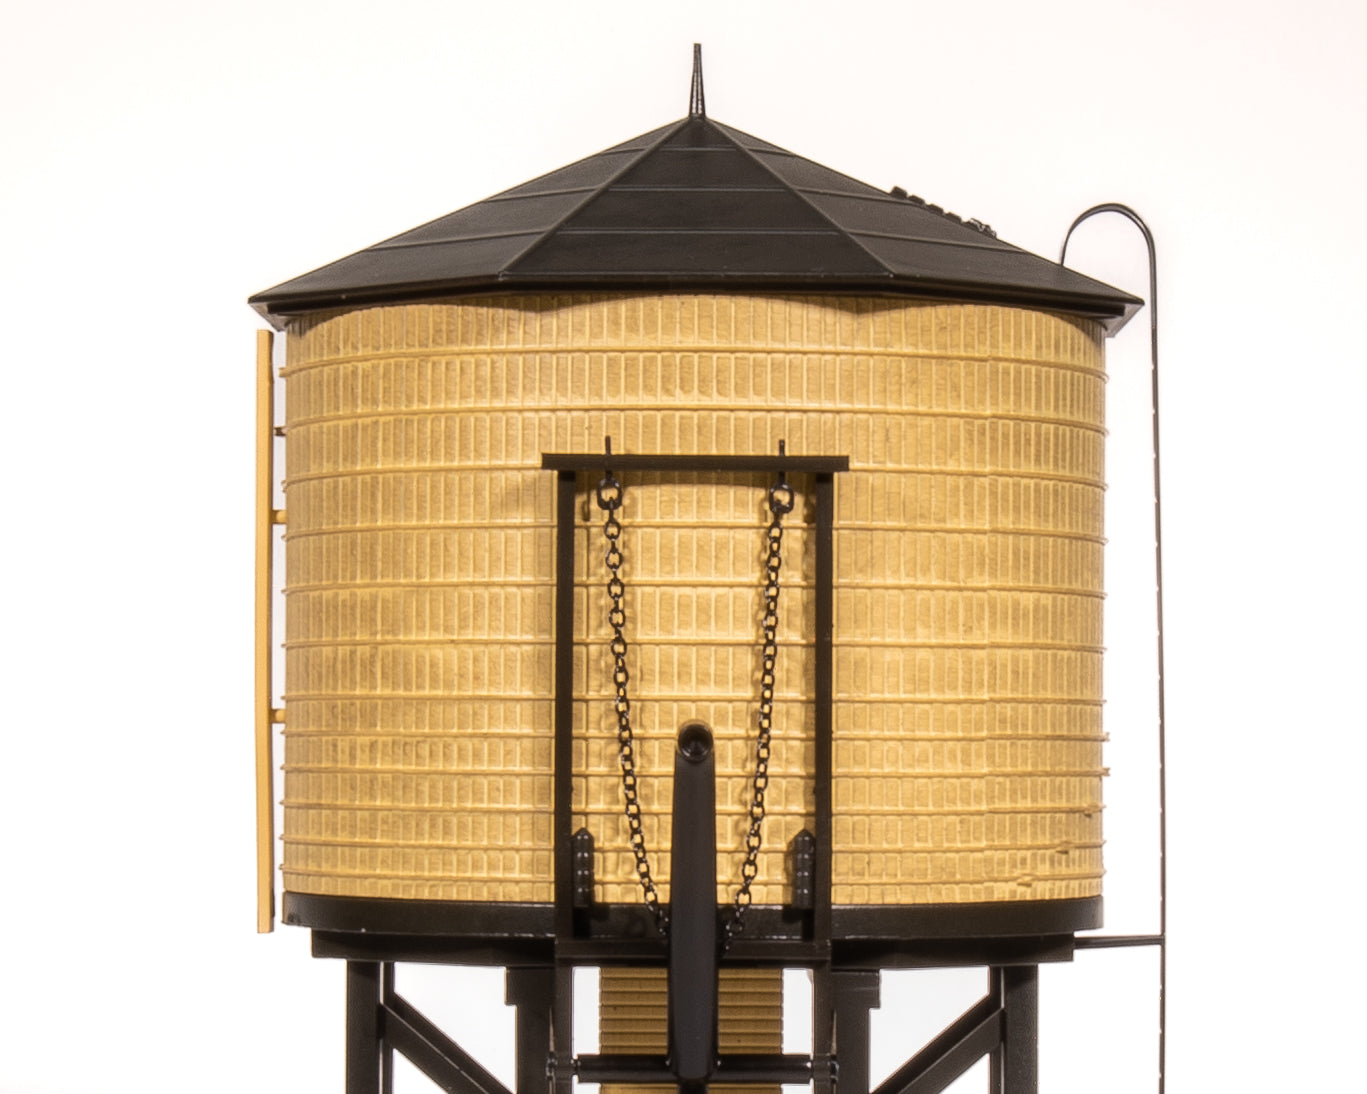 7917 Operating Water Tower w/ Sound, DRGW, Weathered, HO Default Title